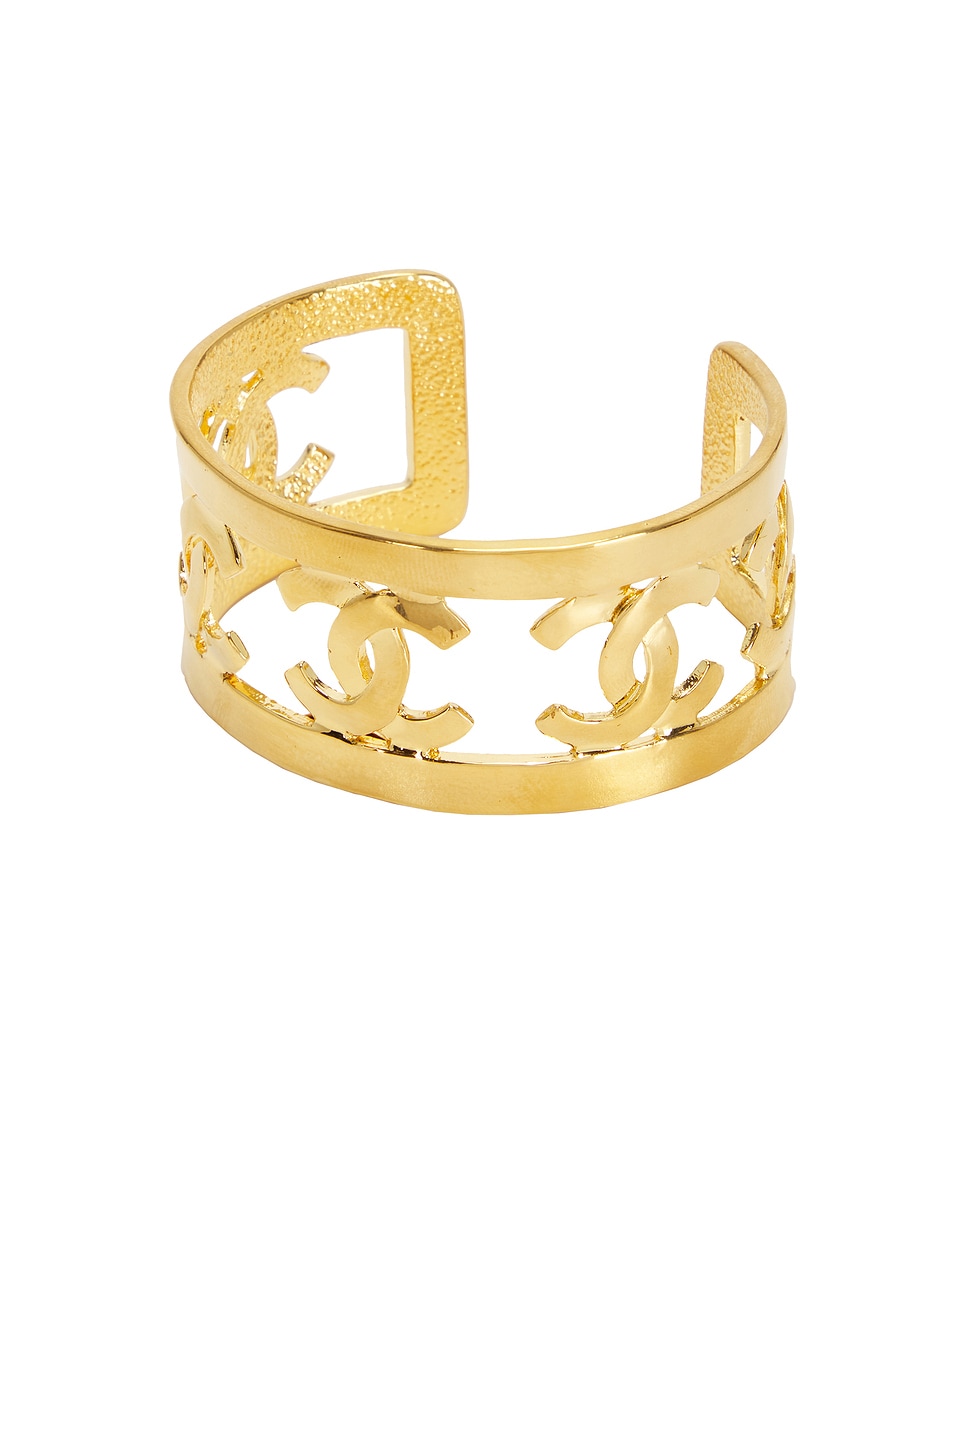 Image 1 of FWRD Renew Chanel Coco Mark Bangle Bracelet in Gold